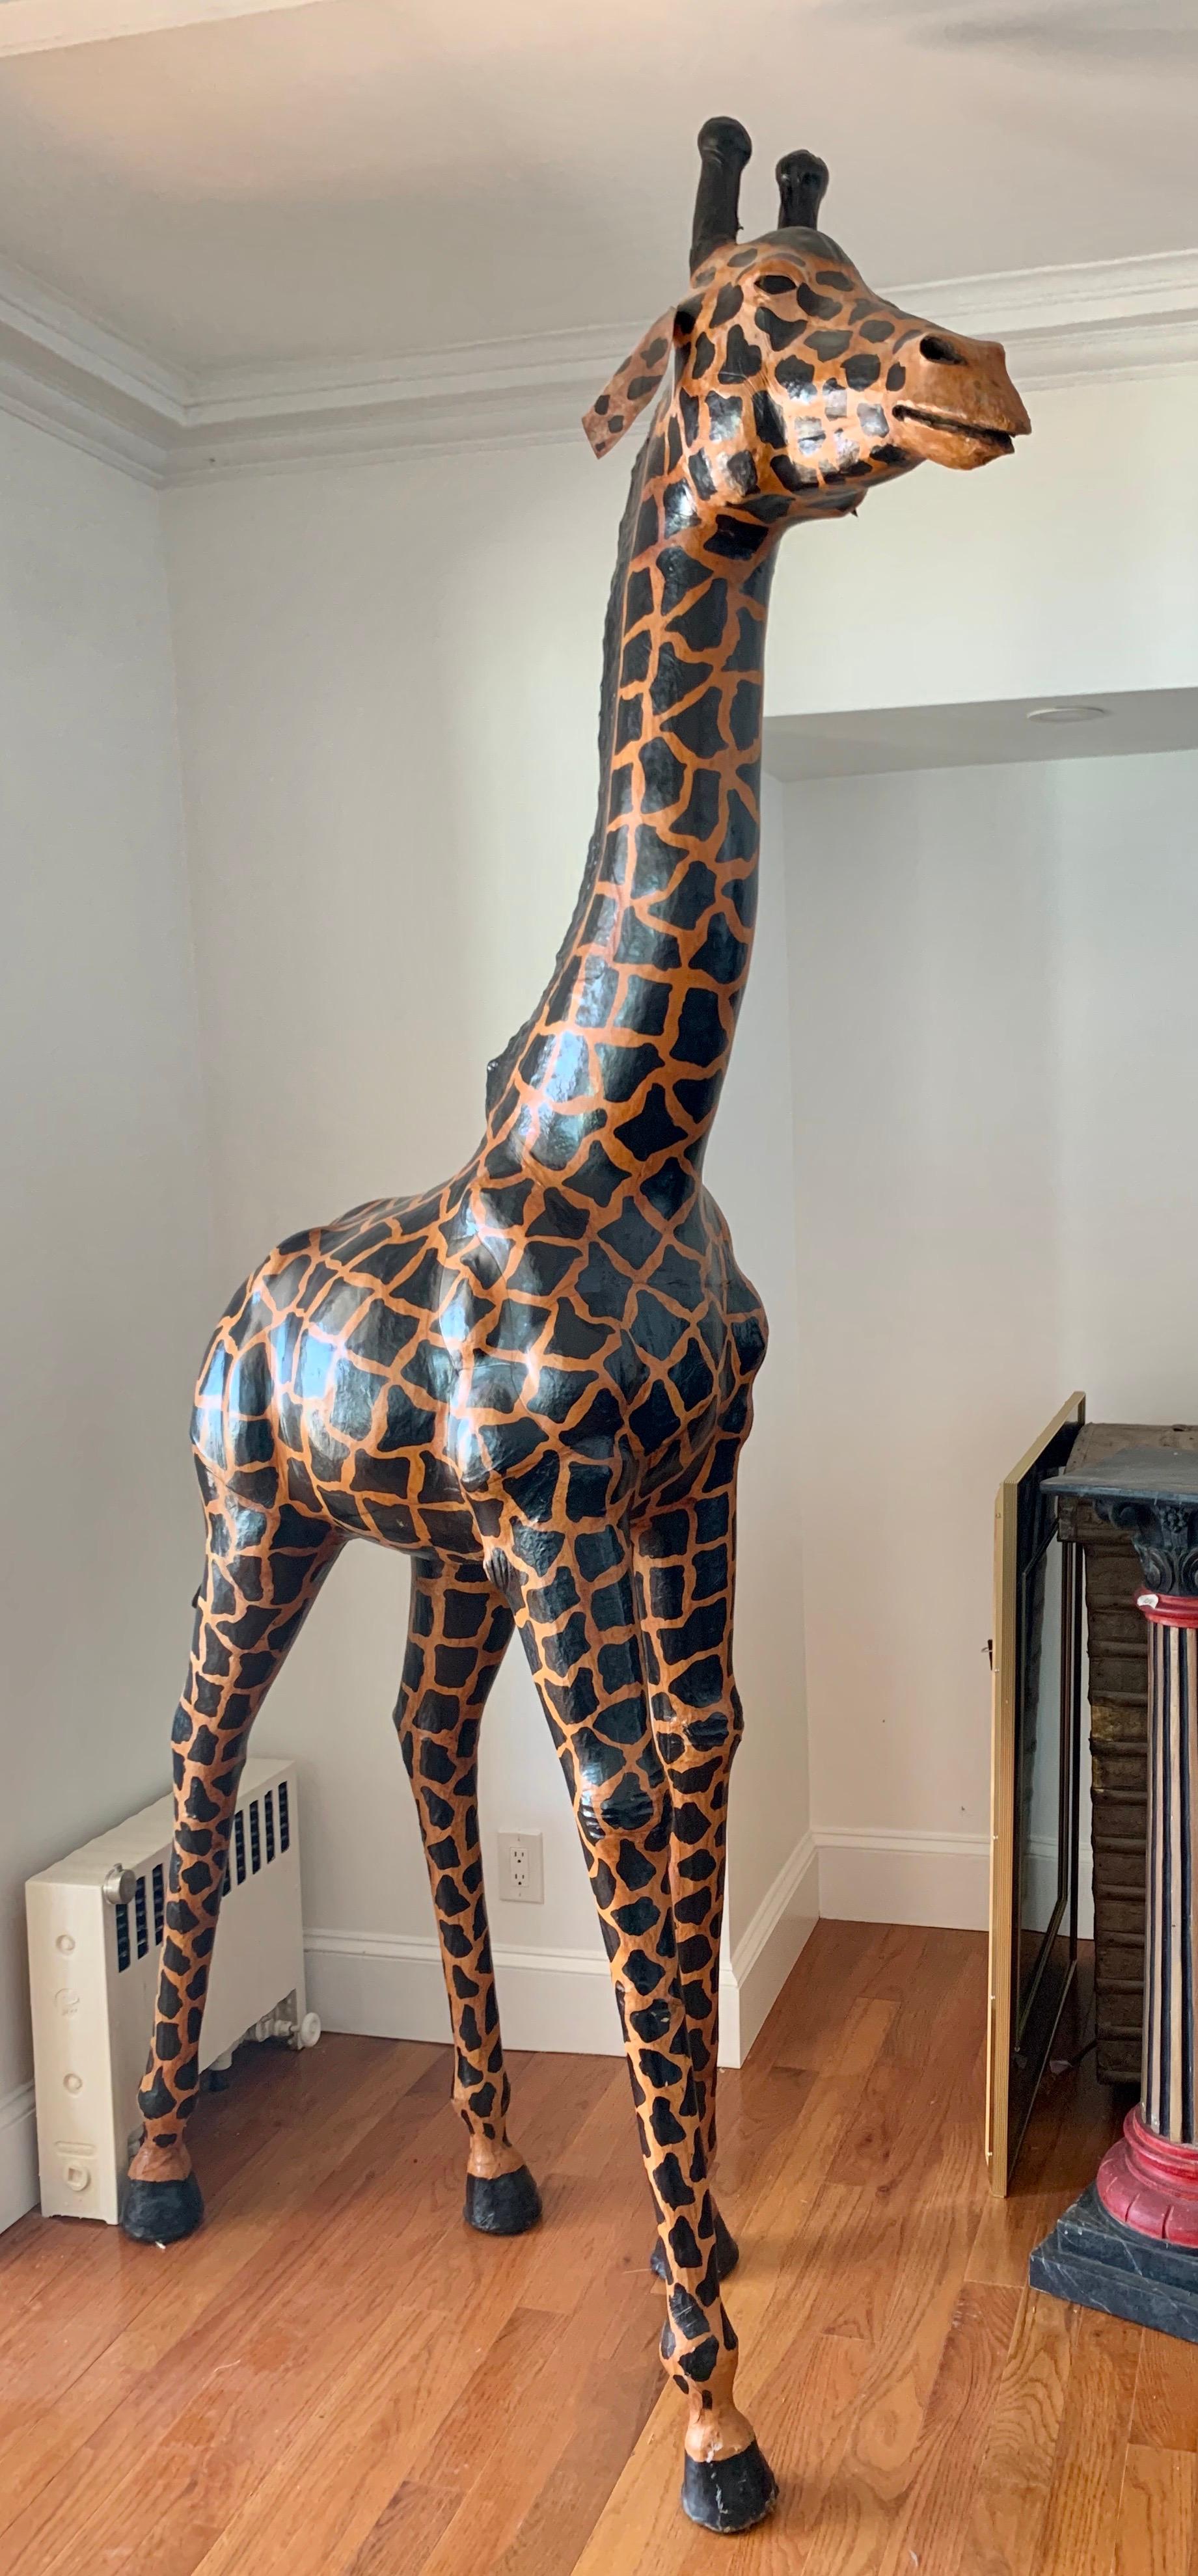 Tall life size handpainted leather giraffe sculpture measures almost nine feet tall. 
Now, more than ever, home is where the heart is.